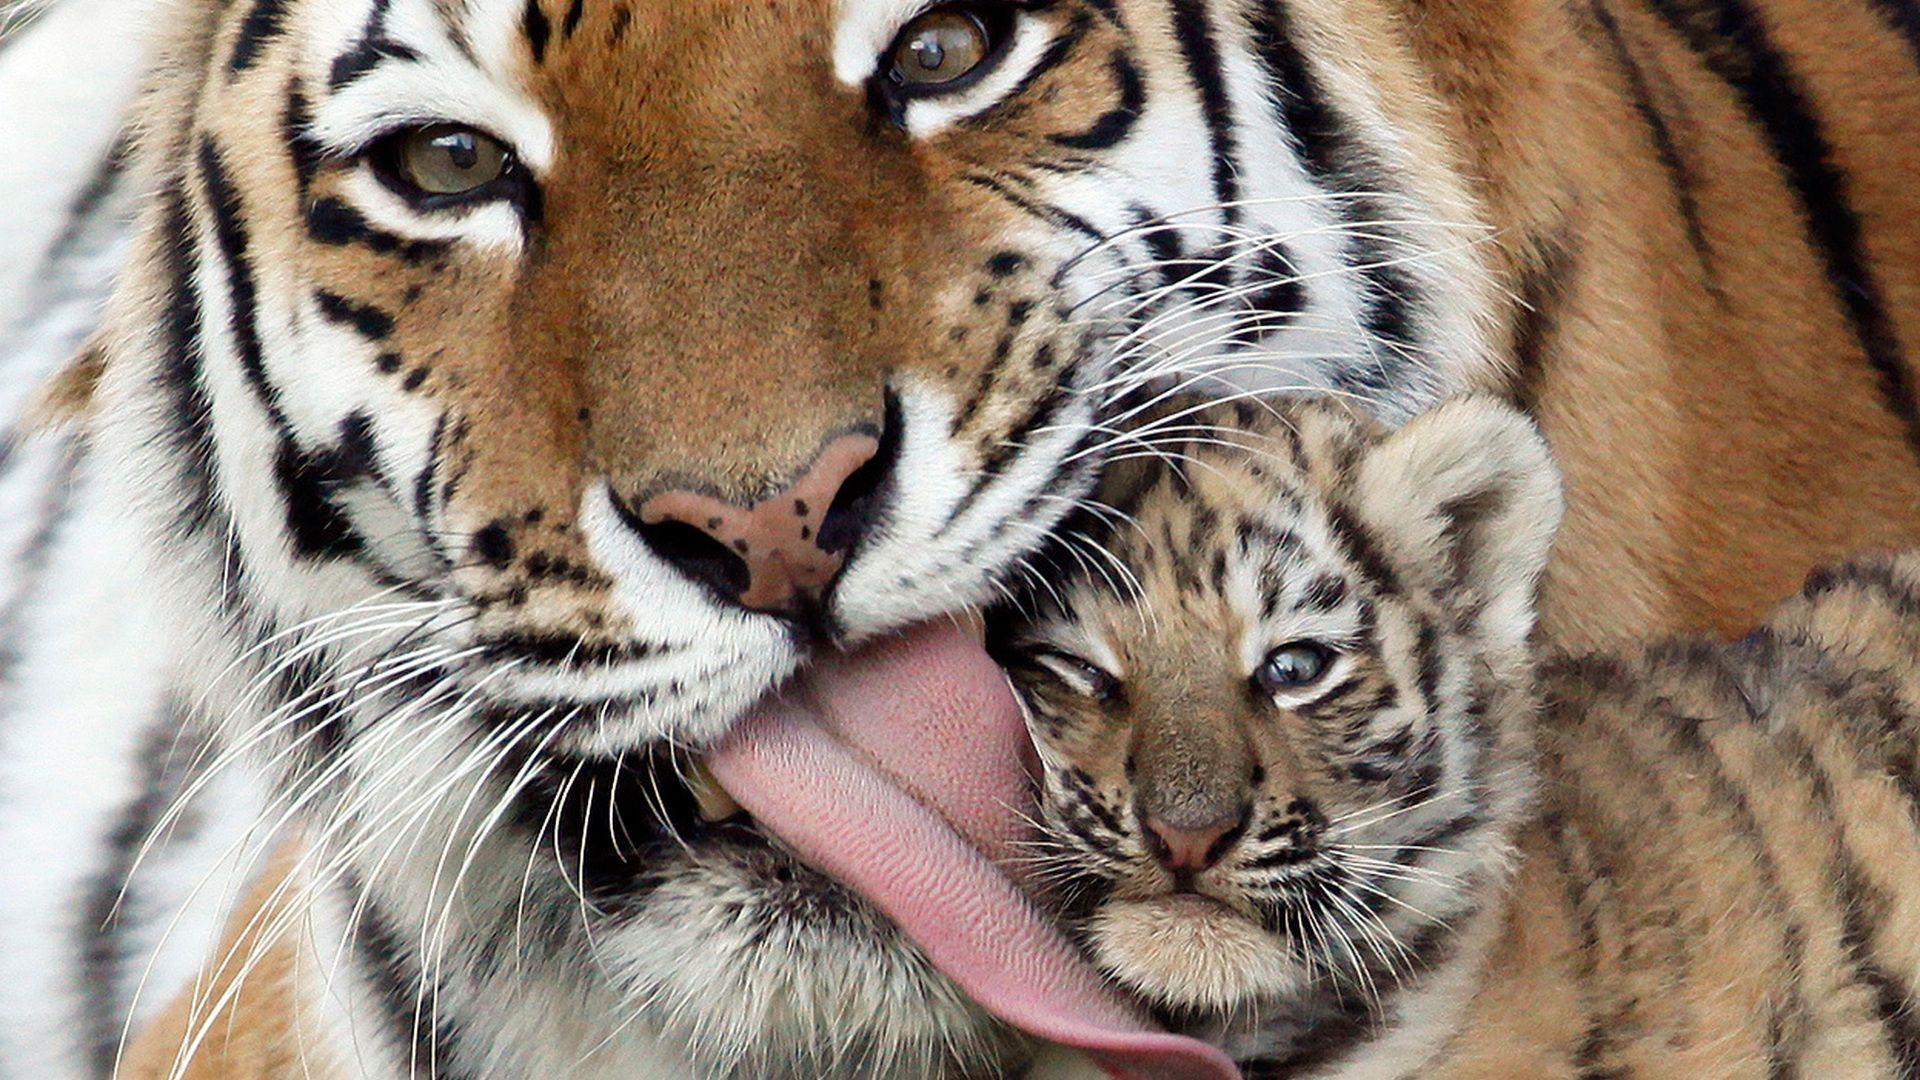 Cute Tiger Cubs HD Wallpaper, Background Image